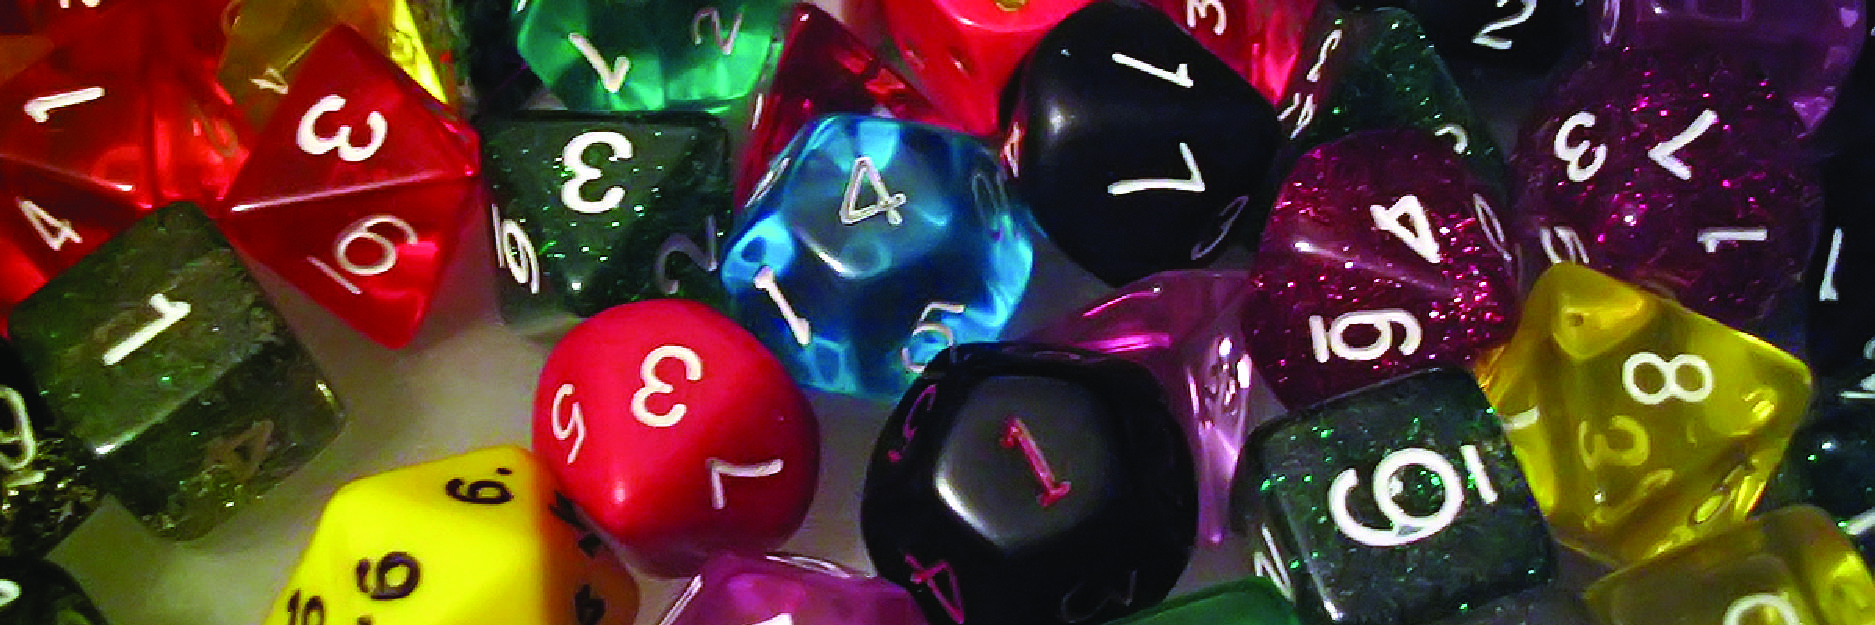 A collection of various shaped and multi-colored dice